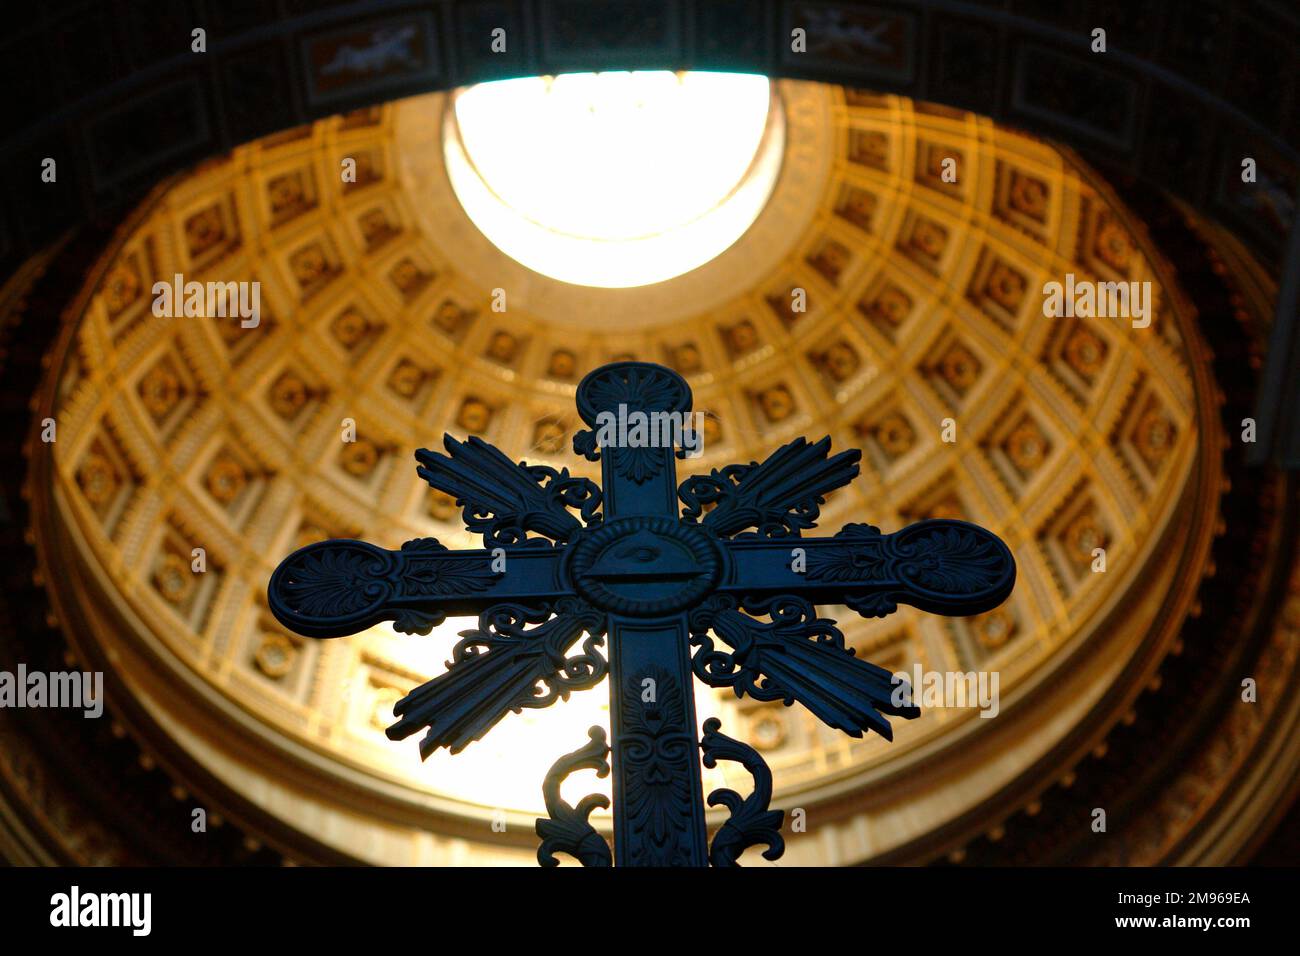 View of an ornate cross with the cupola above it, in the Basilica di San Giovanni in Laterano (Basilica of St John Lateran) in Rome, Italy.  This cathedral is the official ecclesiastical seat of the Bishop of Rome, ie the Pope. Stock Photo